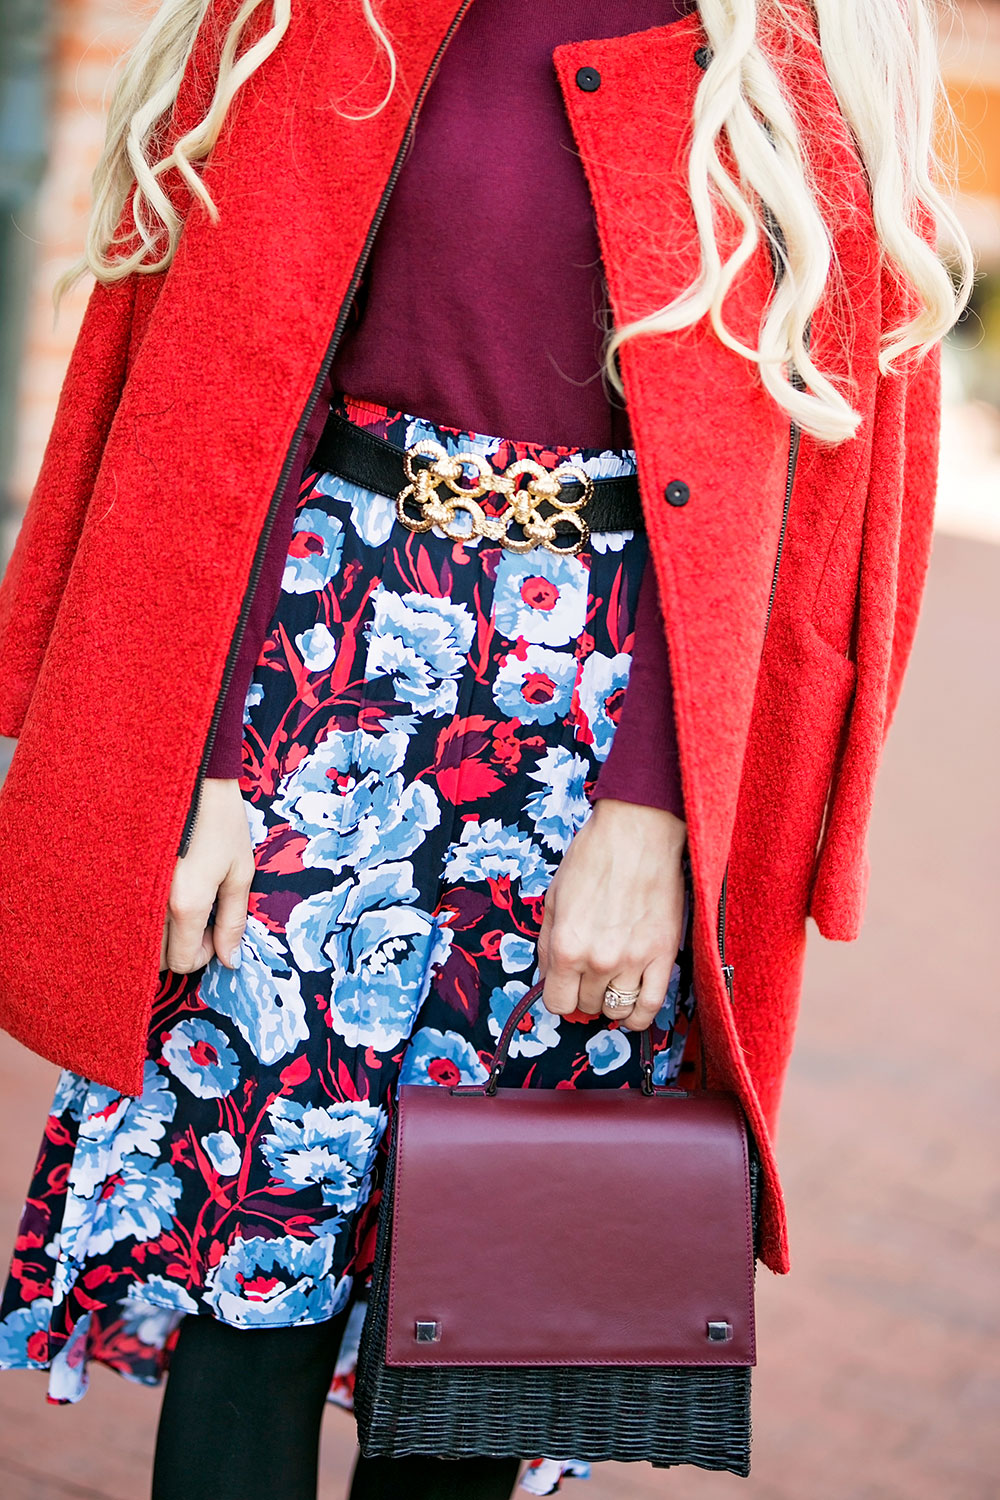 red and burgundy outfit